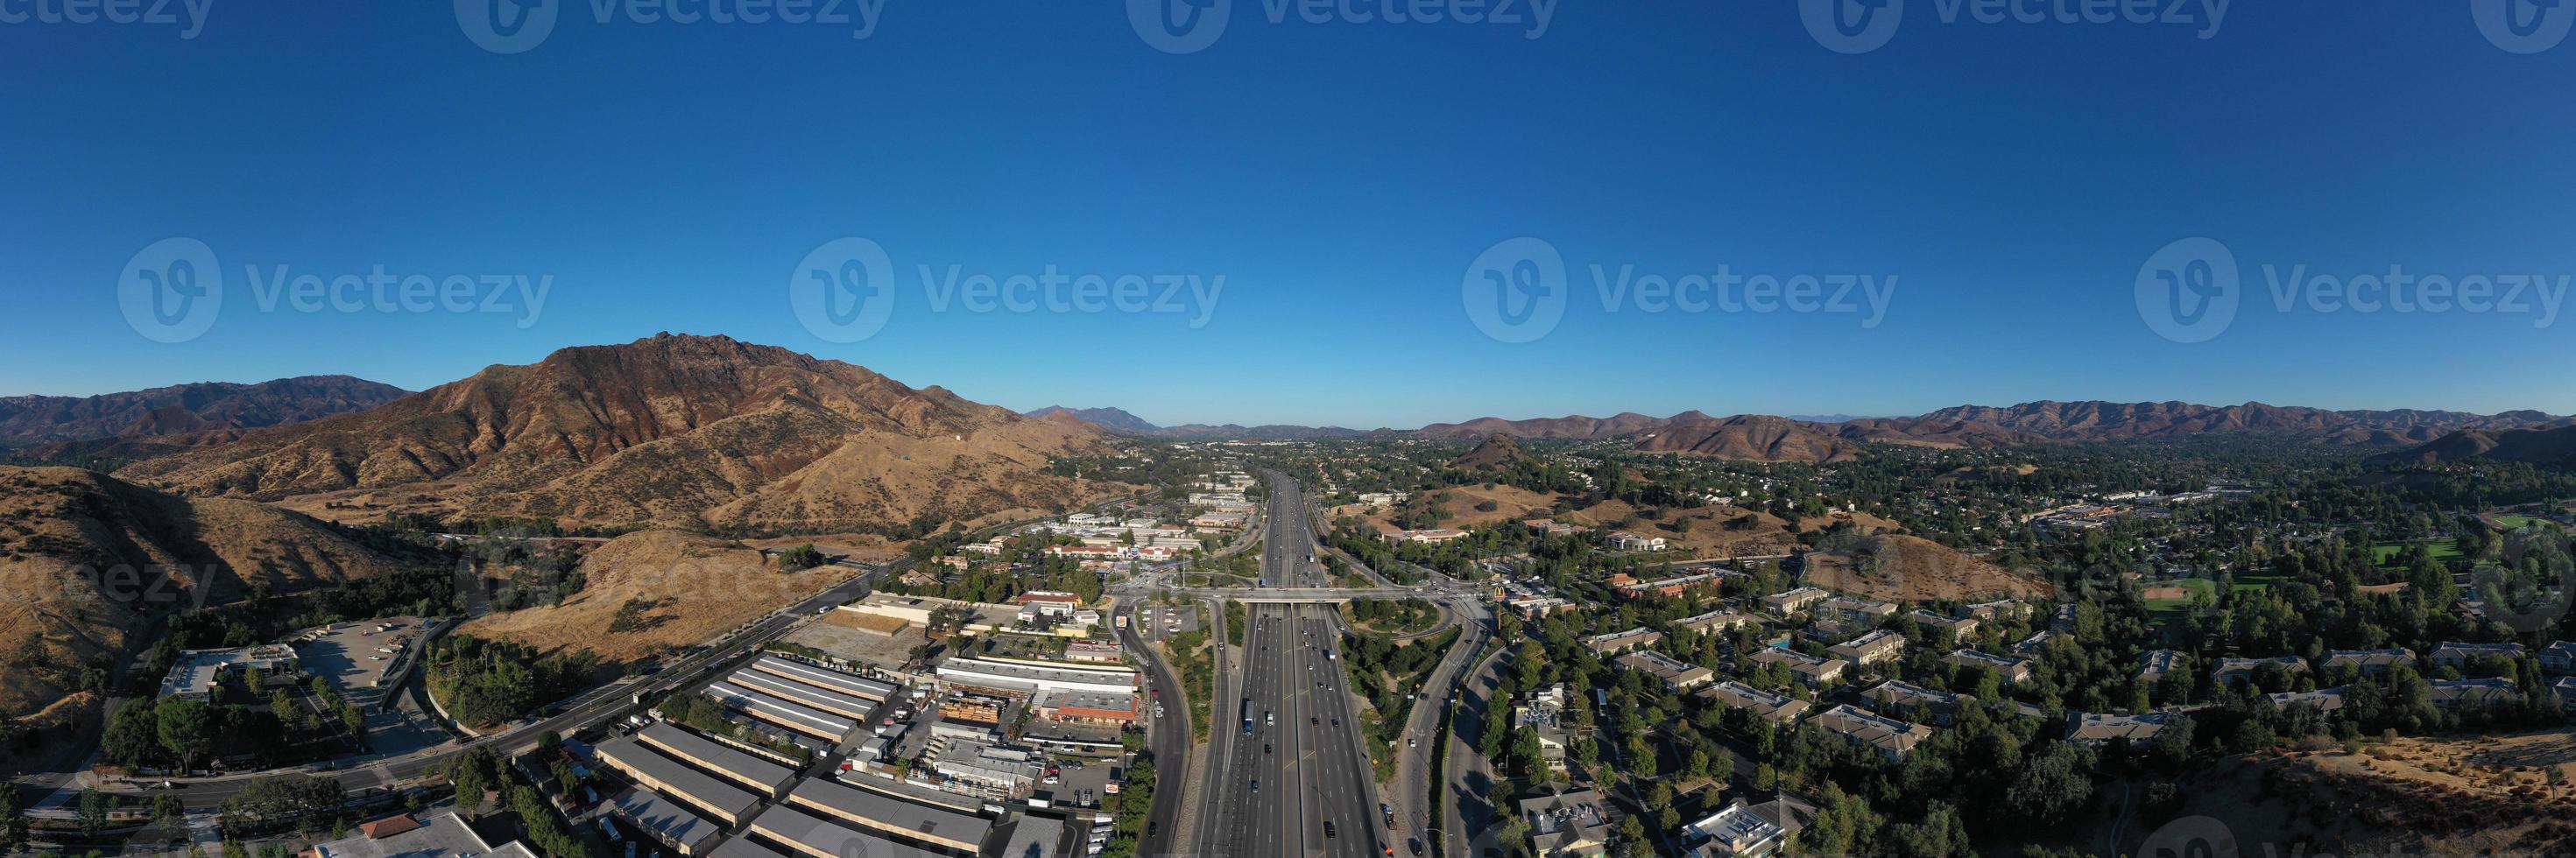 Agoura Hills, CA - Aug 26, 2020 -  Aerial view along Agoura Hills and the Ventura Freeway in Los Angeles County, California. photo